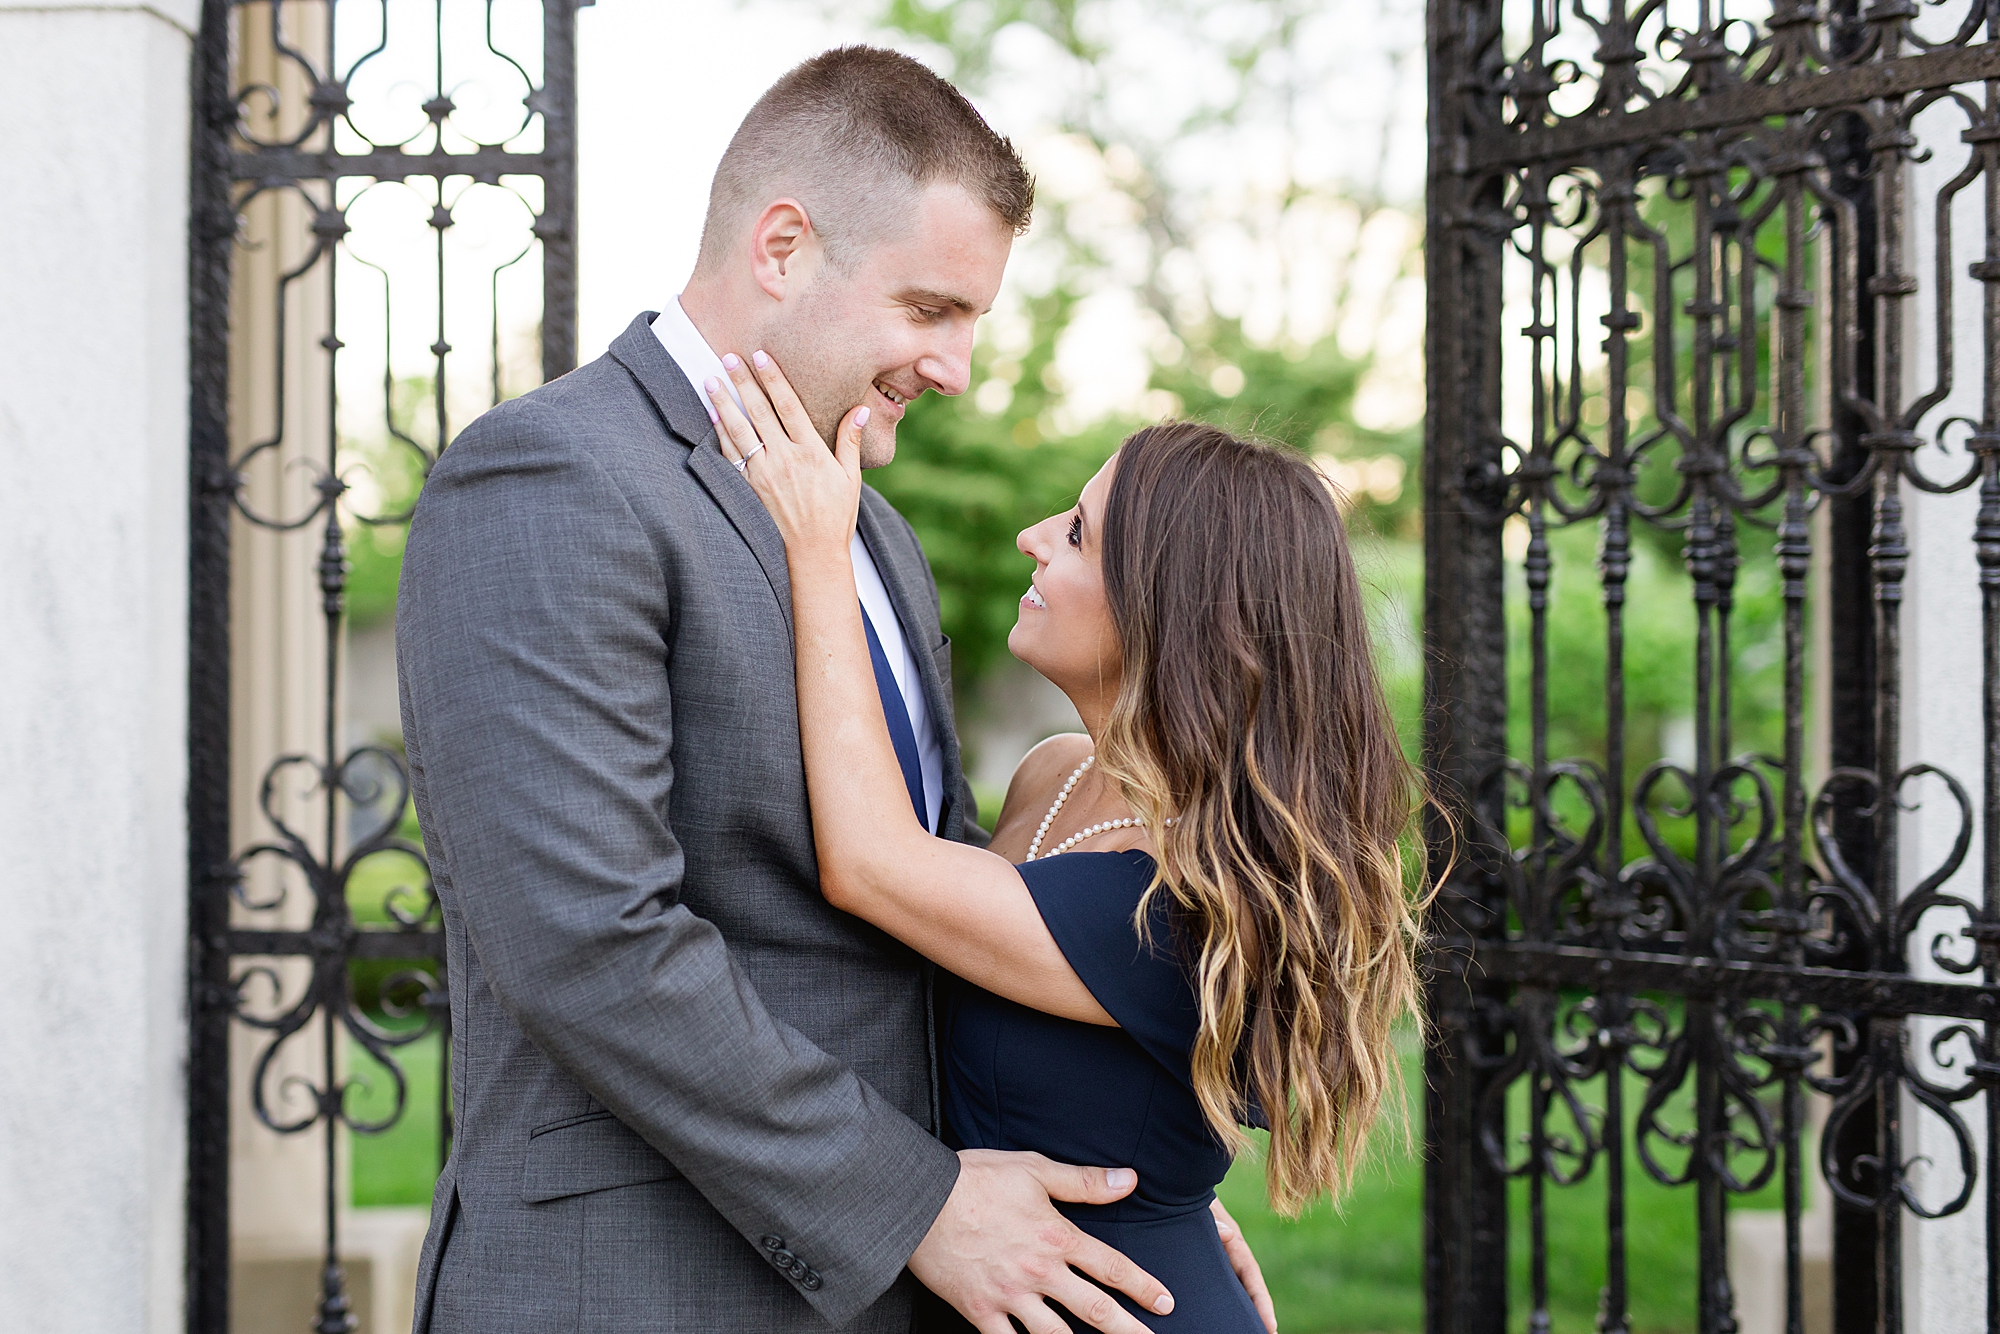 An elegant early summer War Memorial engagement session with an adorable German Shepherd puppy in Grosse Pointe by Breanne Rochelle Photography